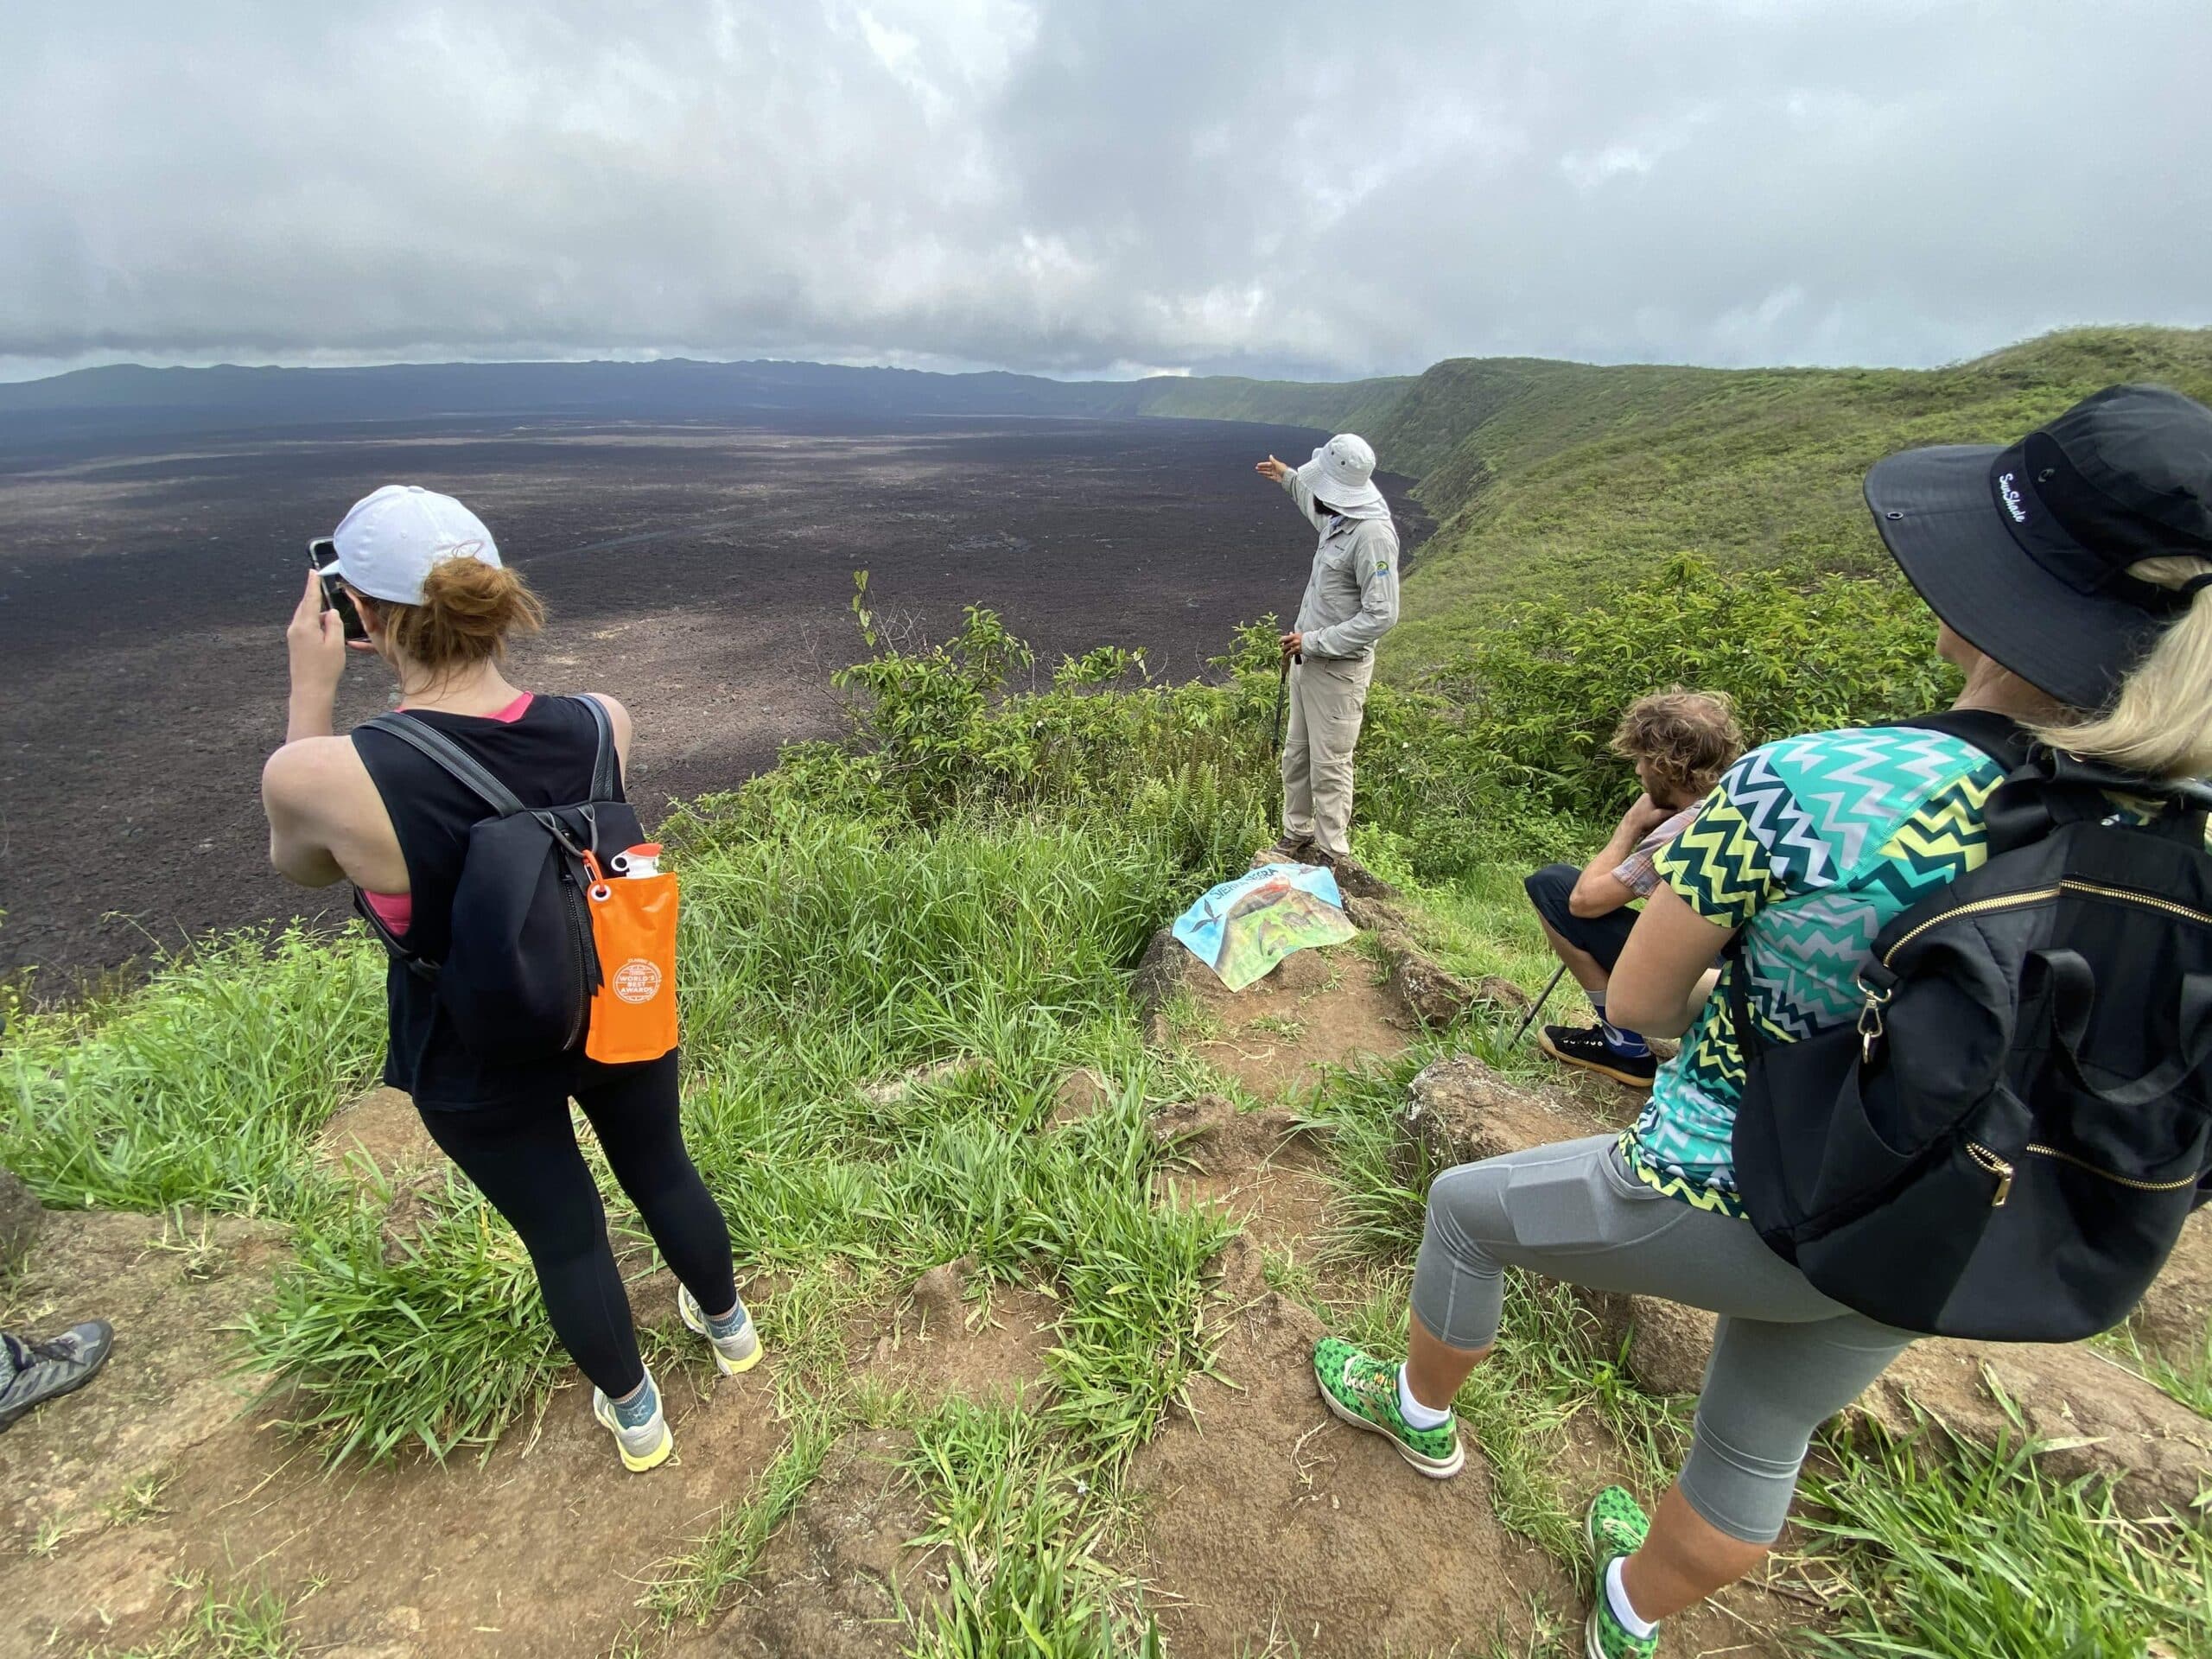 Exploring the rim of Volcan Sierra Negra in the Galapagos